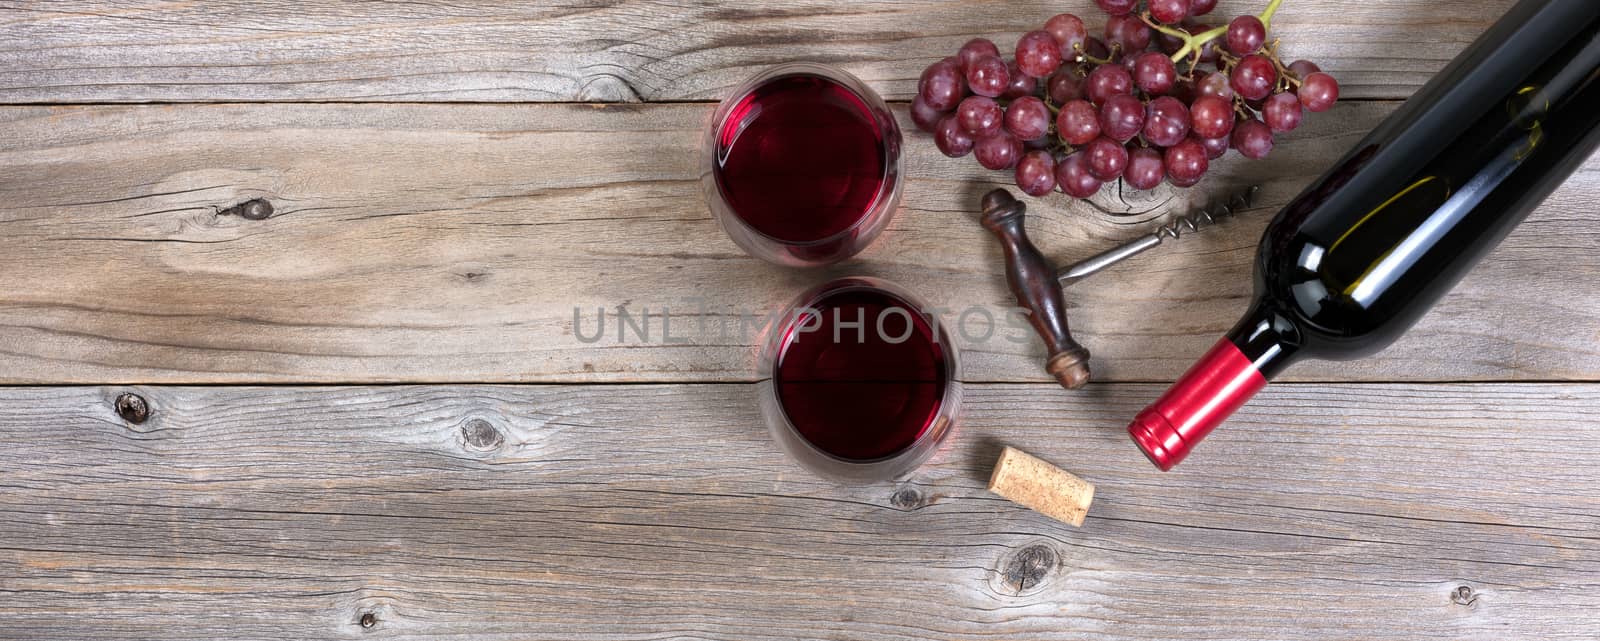 Unopen bottle of red wine and glasses with grapes on rustic wood by tab1962